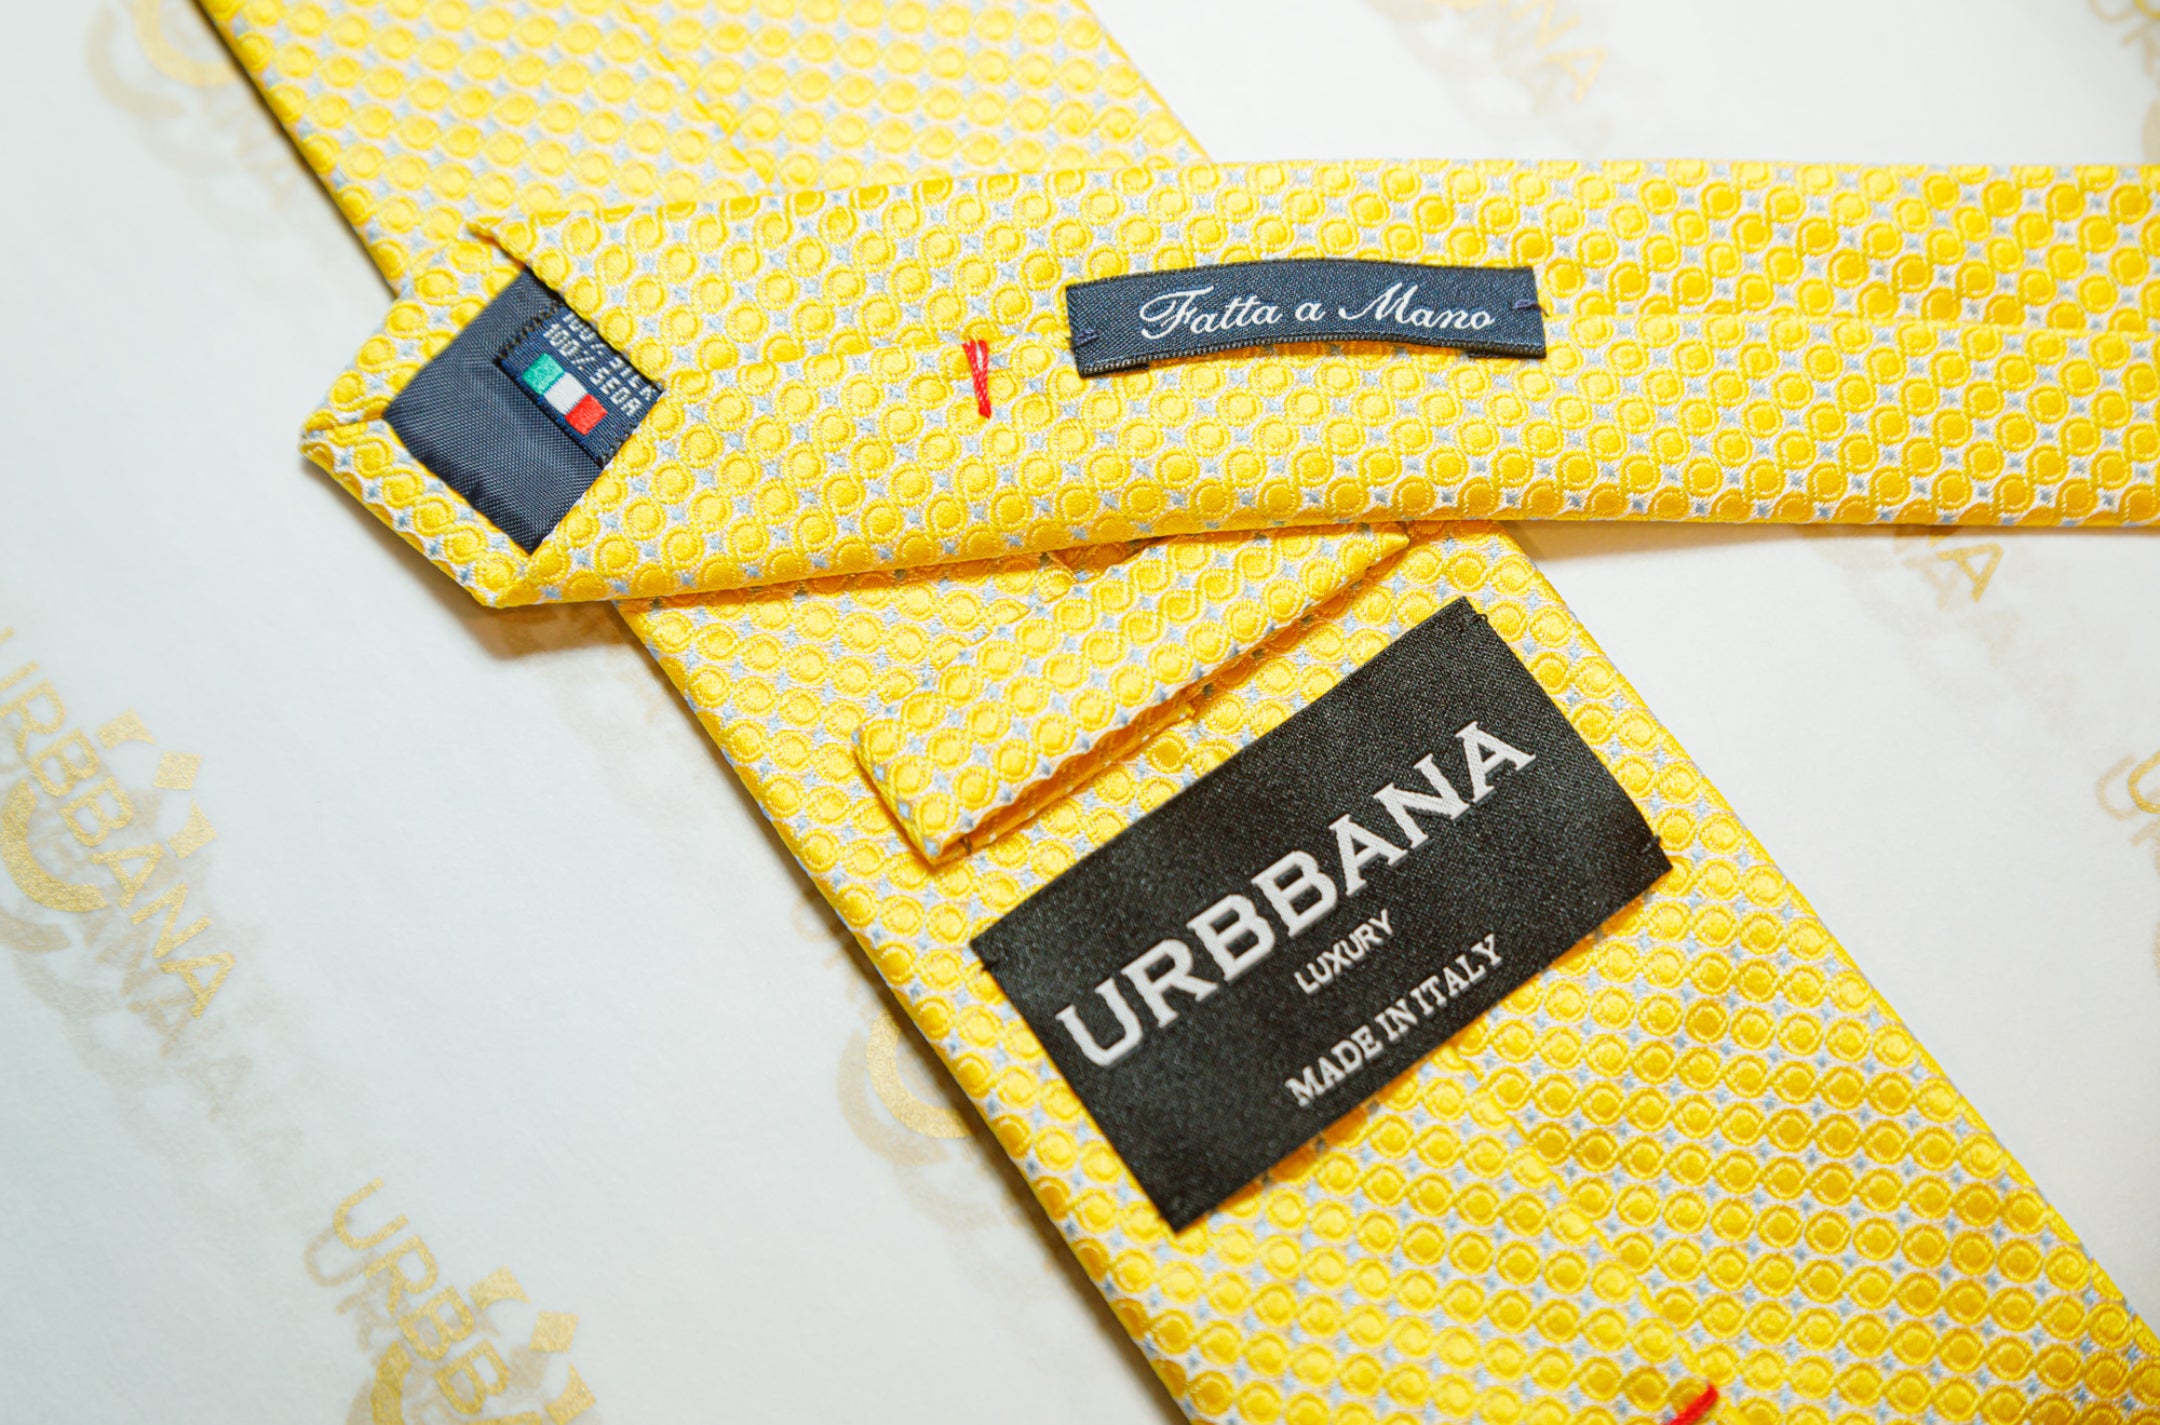 The Cuadro Silk Tie - Made in Italy